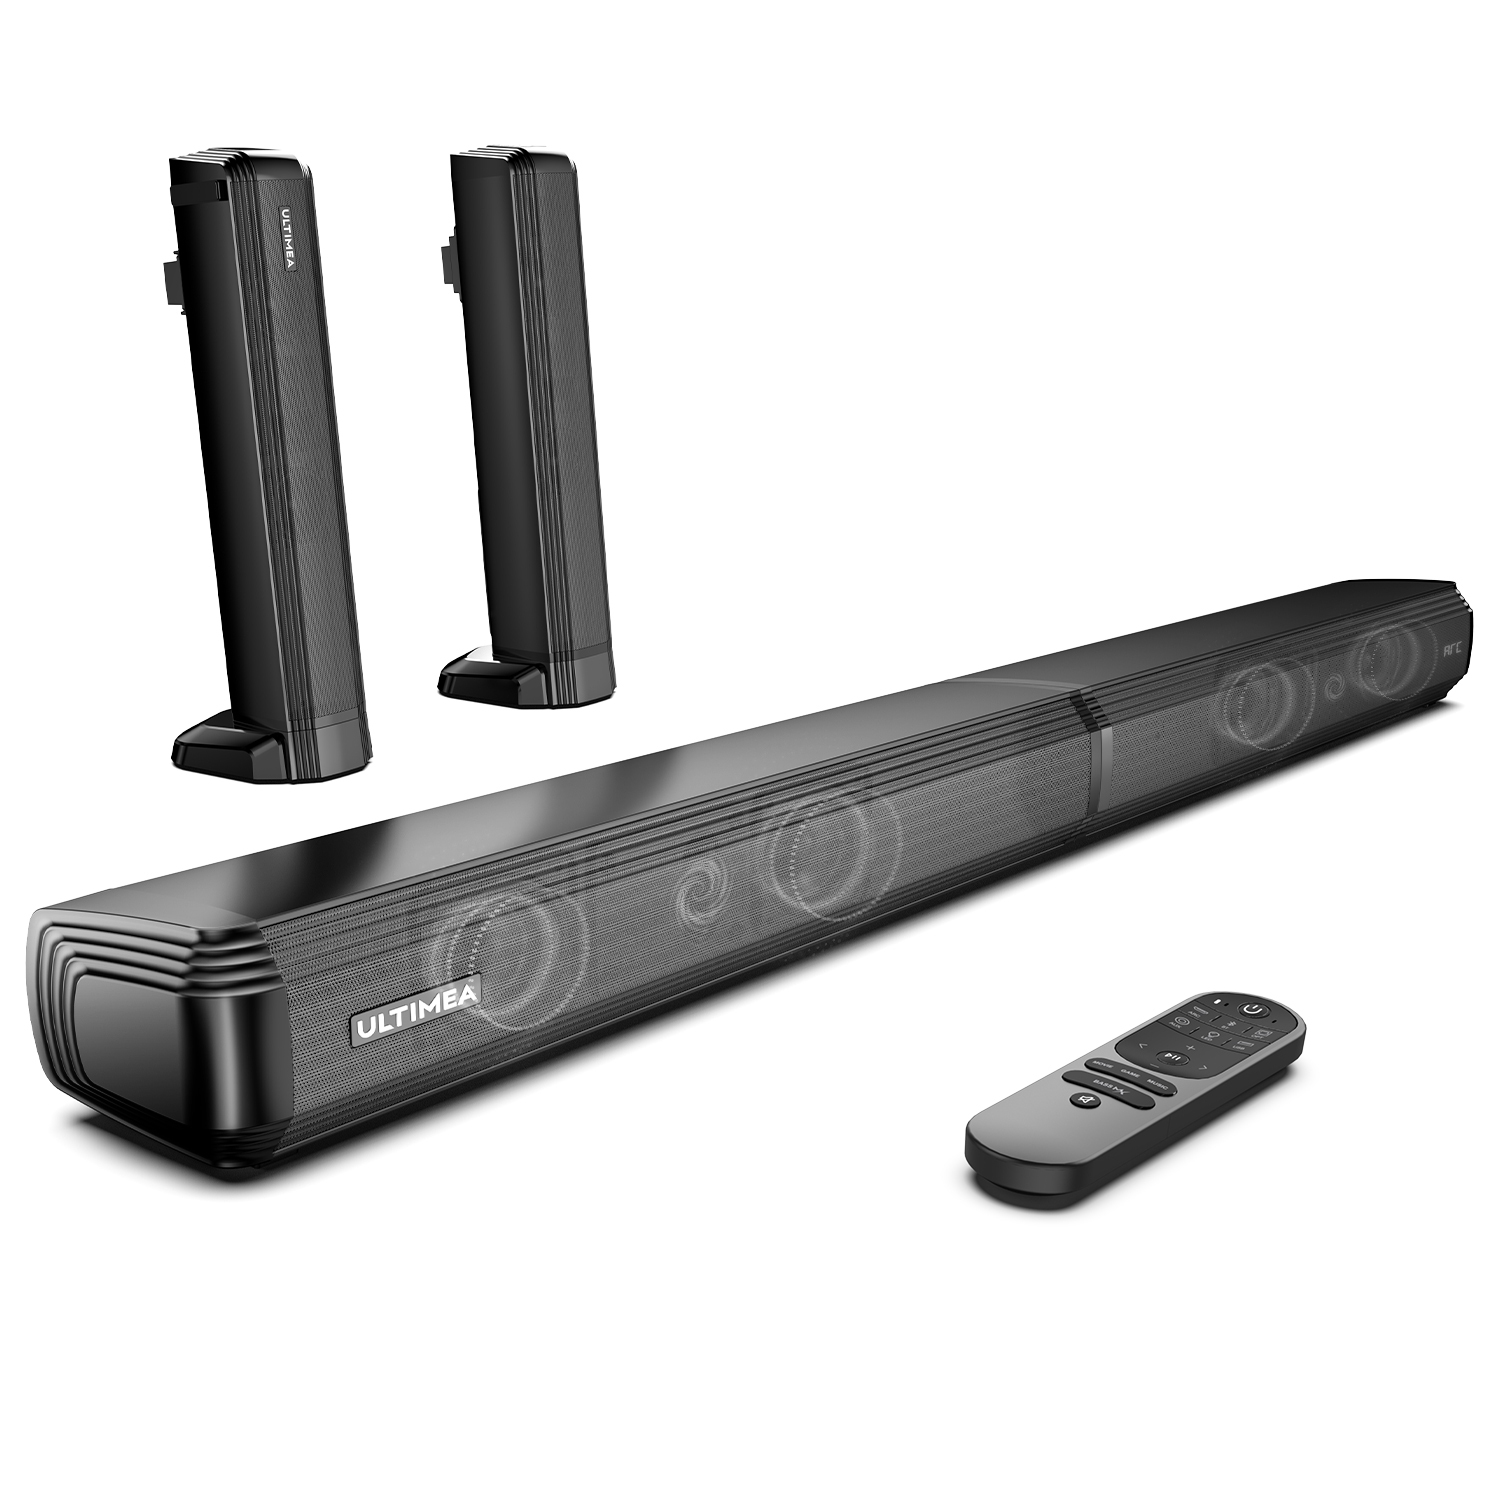 ULTIMEA 2.2ch Sound Bars for TV, Built-in Dual Subwoofer, 2 in 1 Separable Bluetooth 5.3 Sound bar, 3 EQ Modes TV SoundBar, HDMI/Optical/Aux Home Theater Speakers